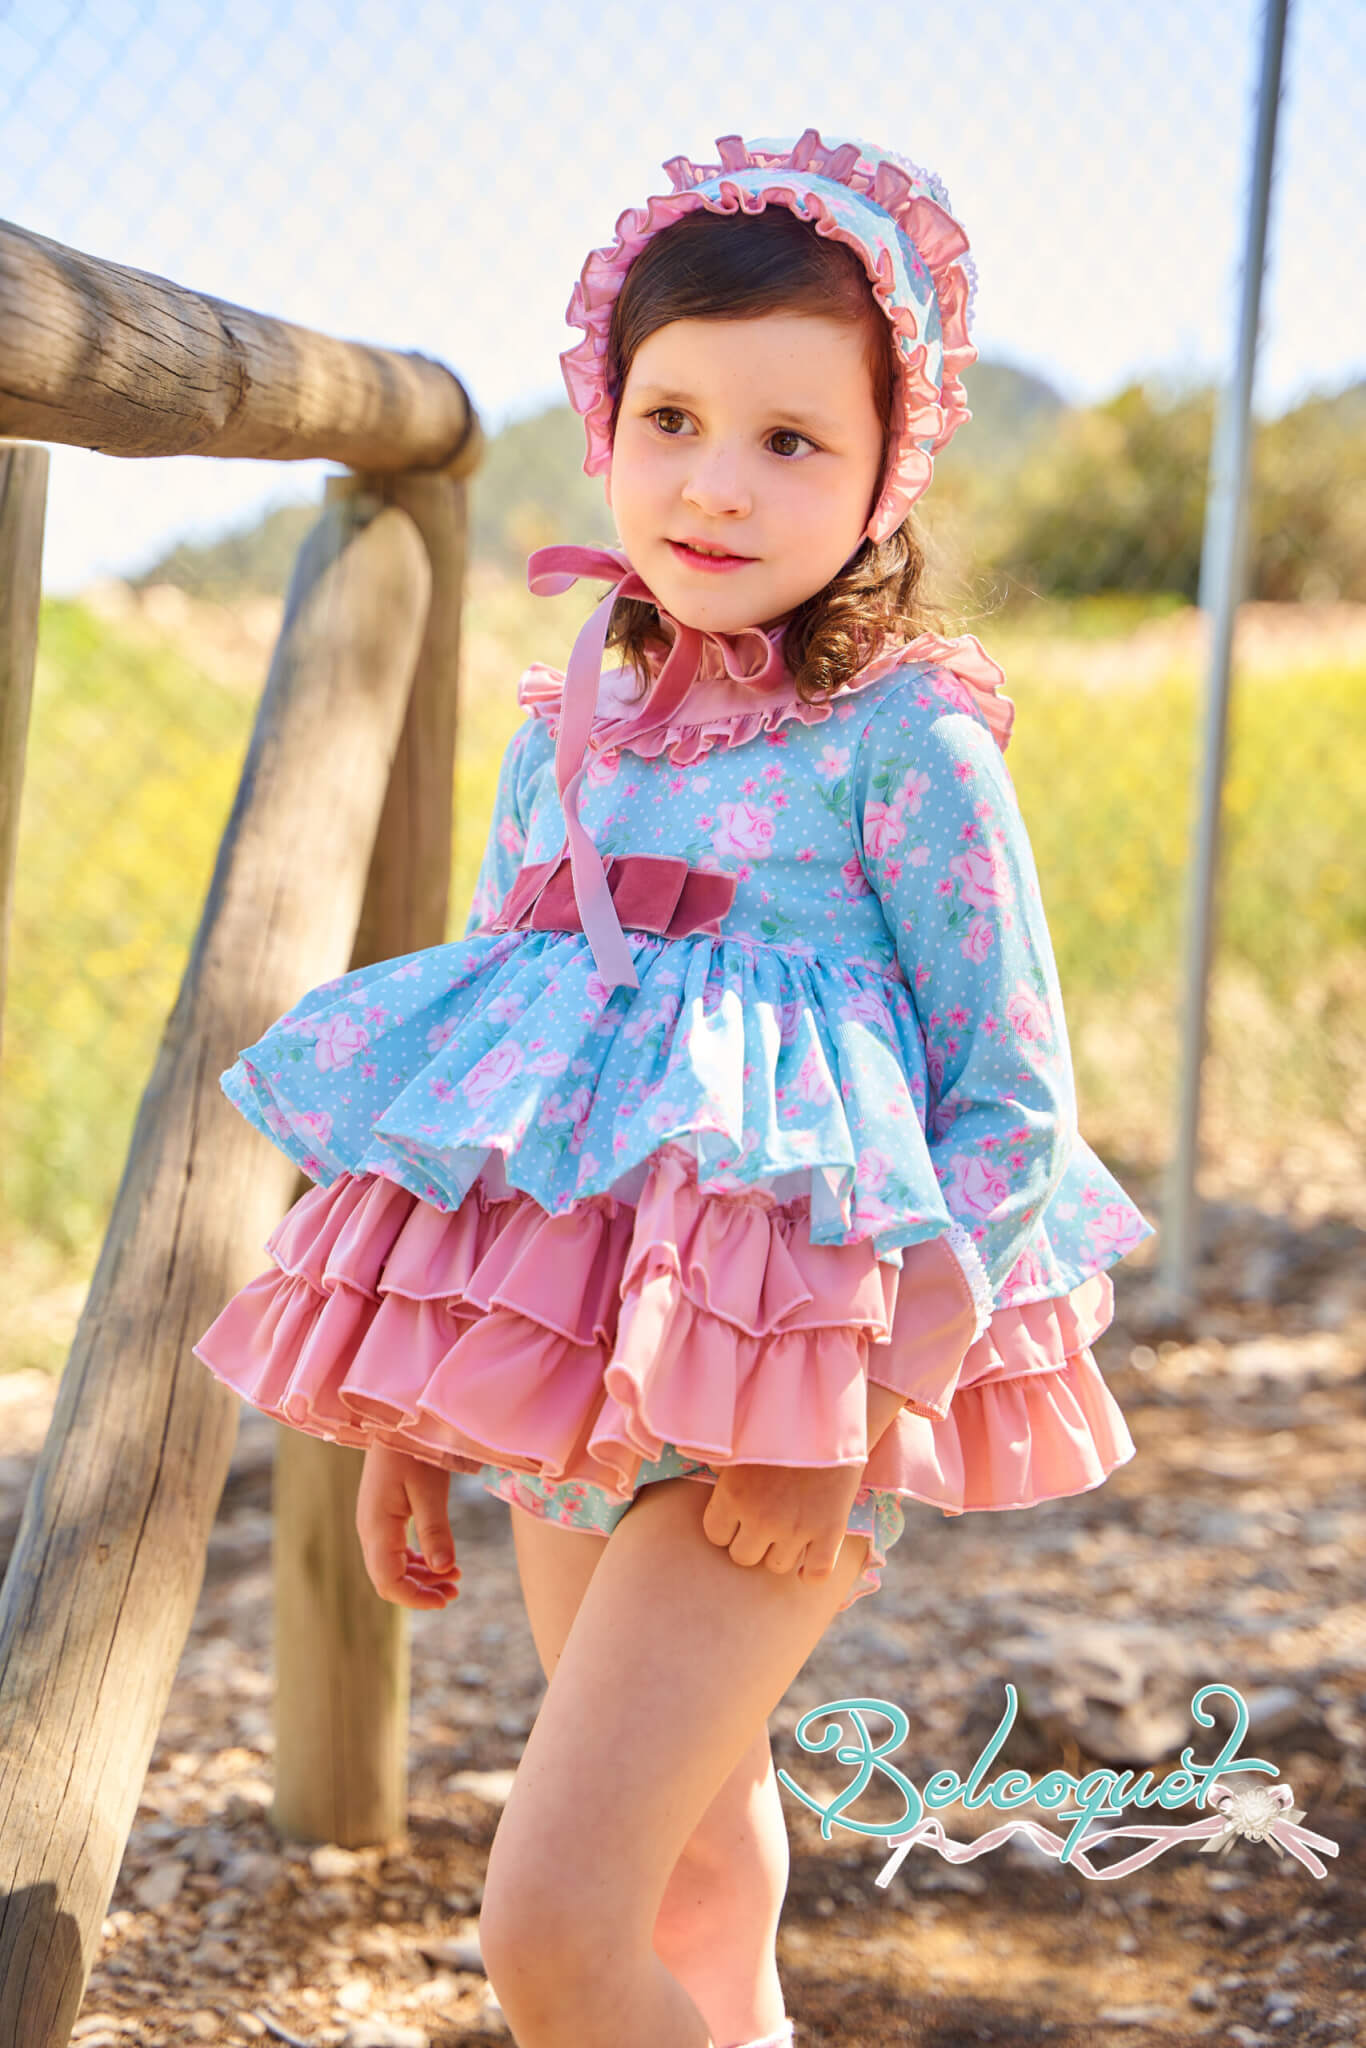 Sleeping Beauty baby dress with knickers